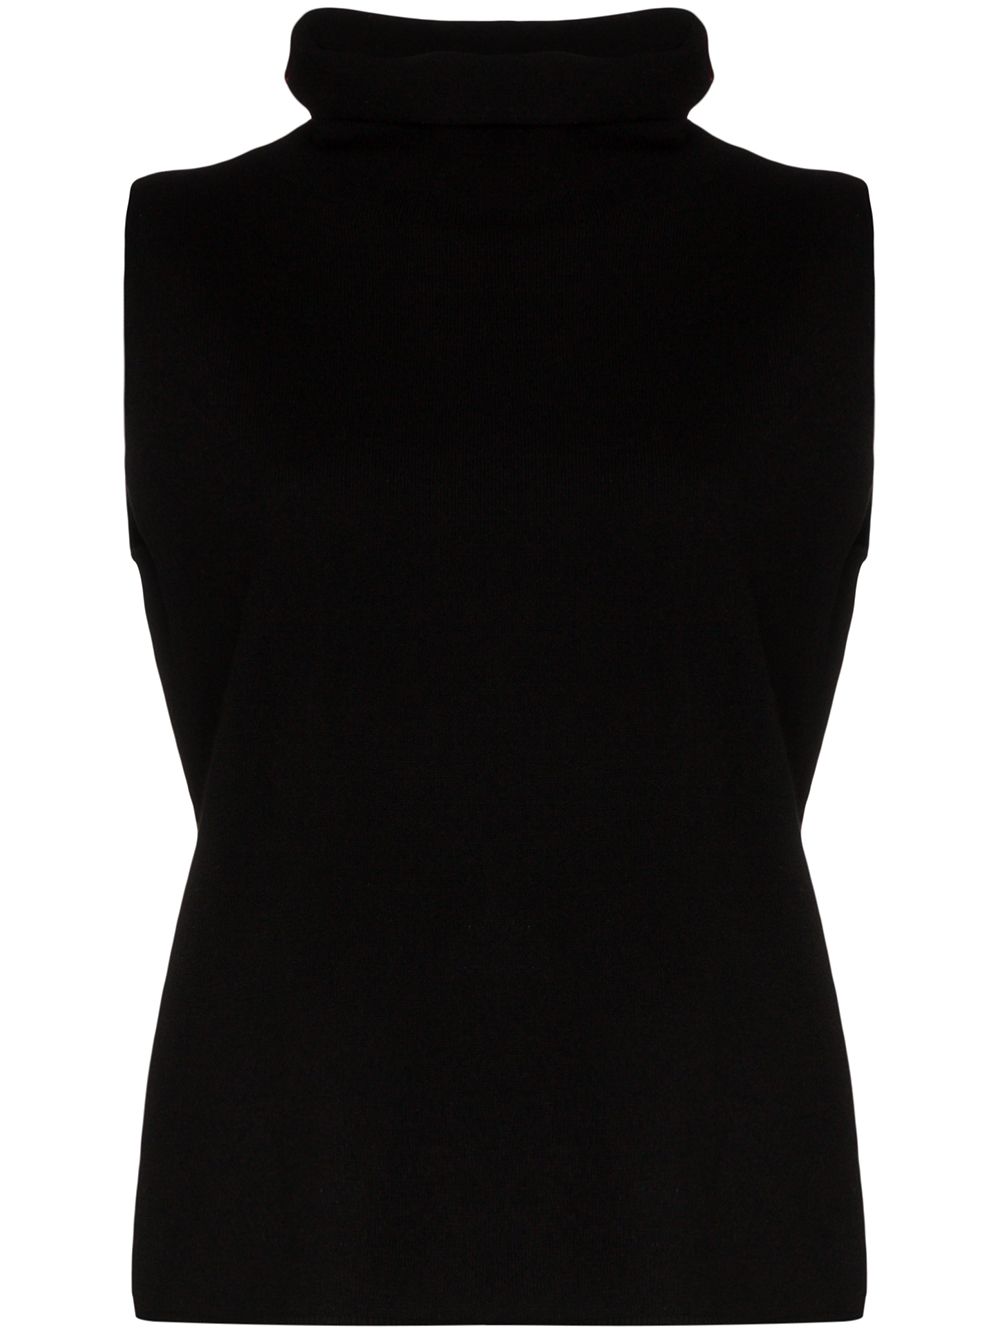 PLY-KNITS SLEEVELESS CASHMERE TURTLENECK TOP